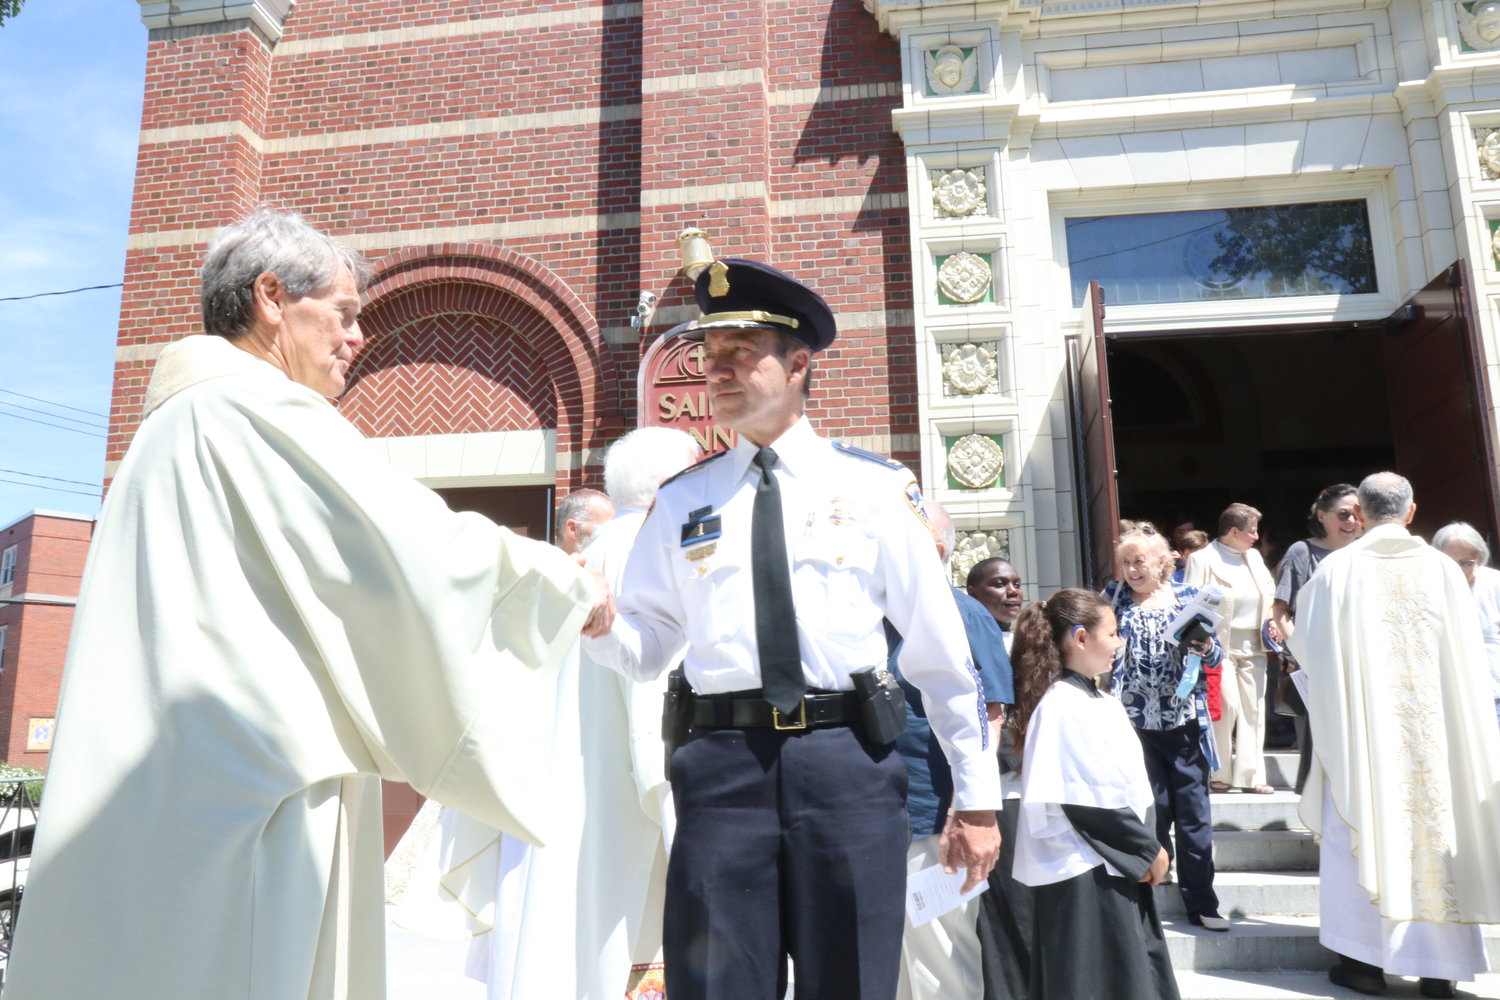 Providence Police Chief Hugh Clements greets Father David Ricard, chaplain at Kent County Hospital for more than 40 years, complimenting him on his homily after the Mass of Thanksgiving.